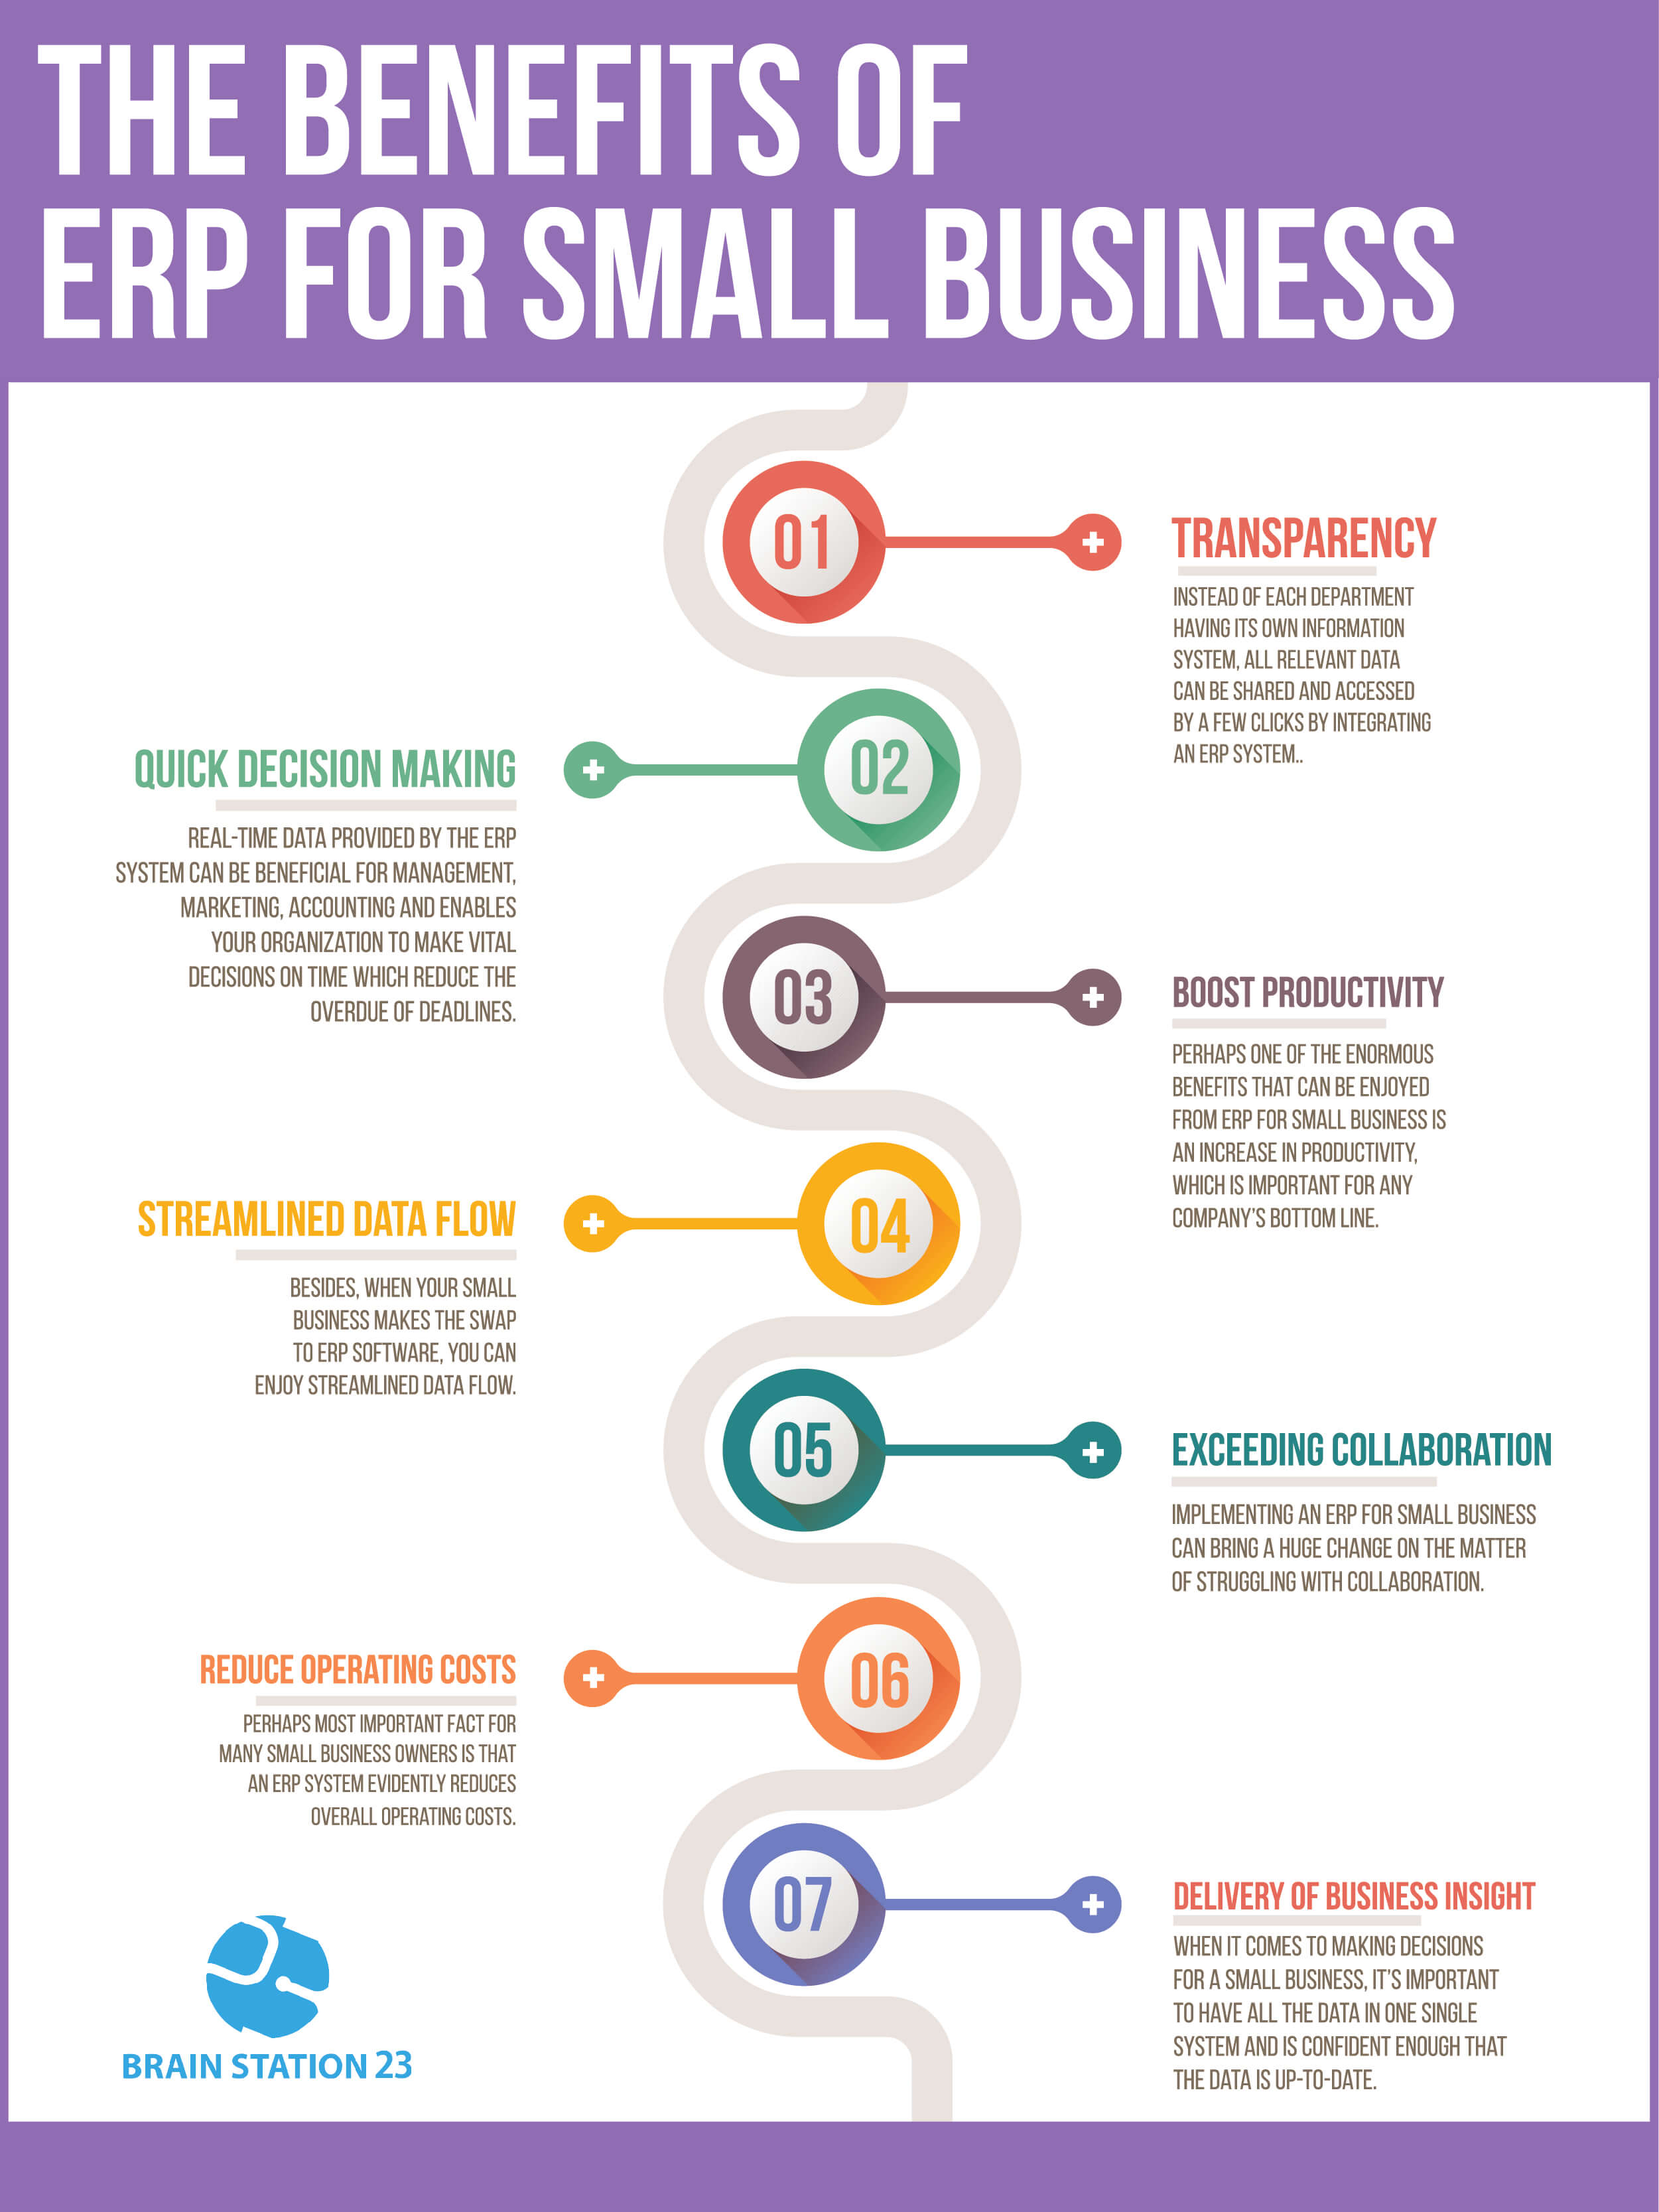 The Benefits Of ERP For Small Business